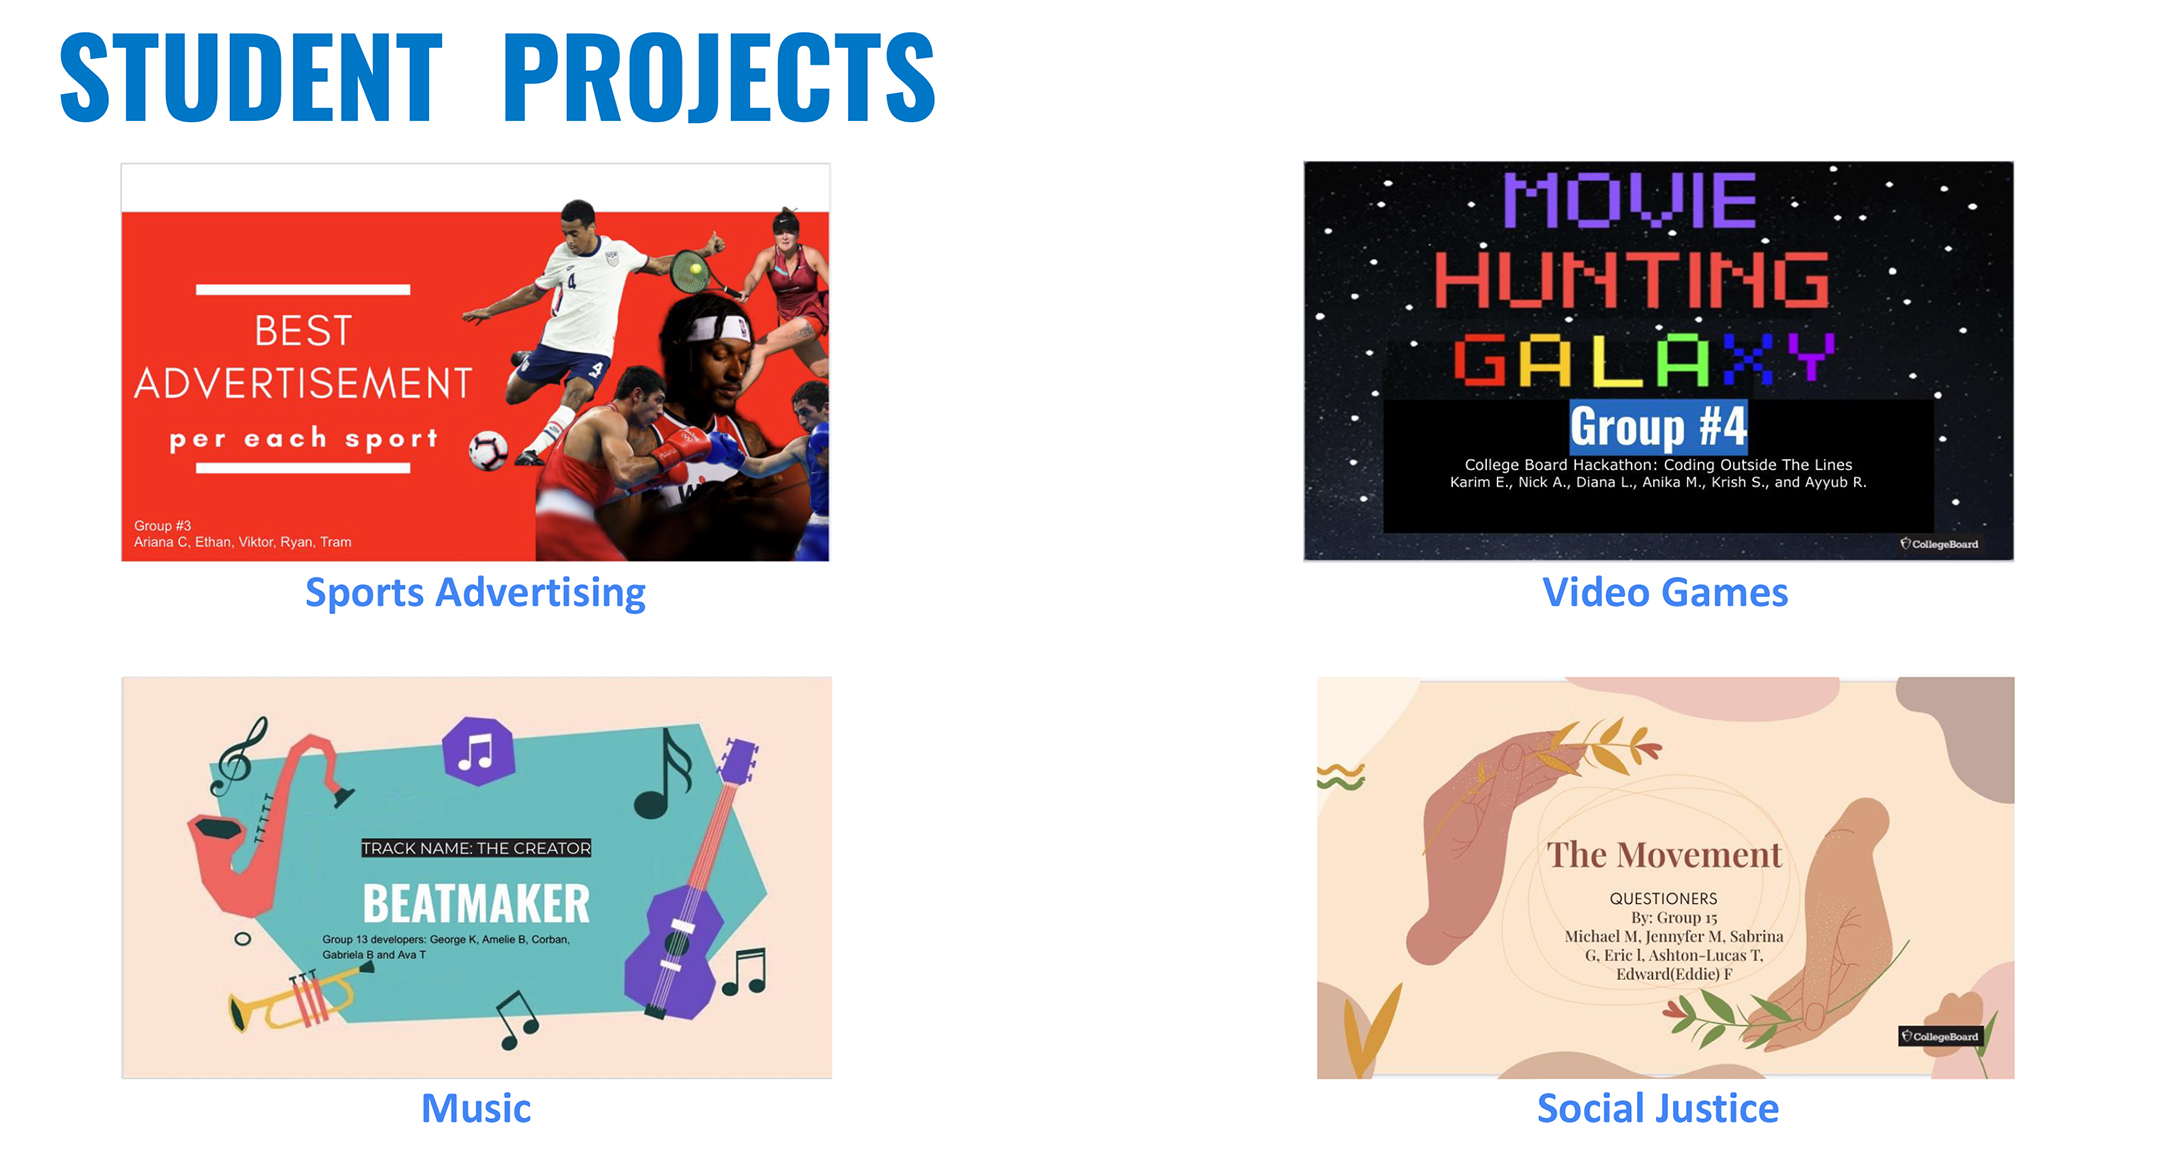 presentation screenshot showing a grid of four student projects, two by two